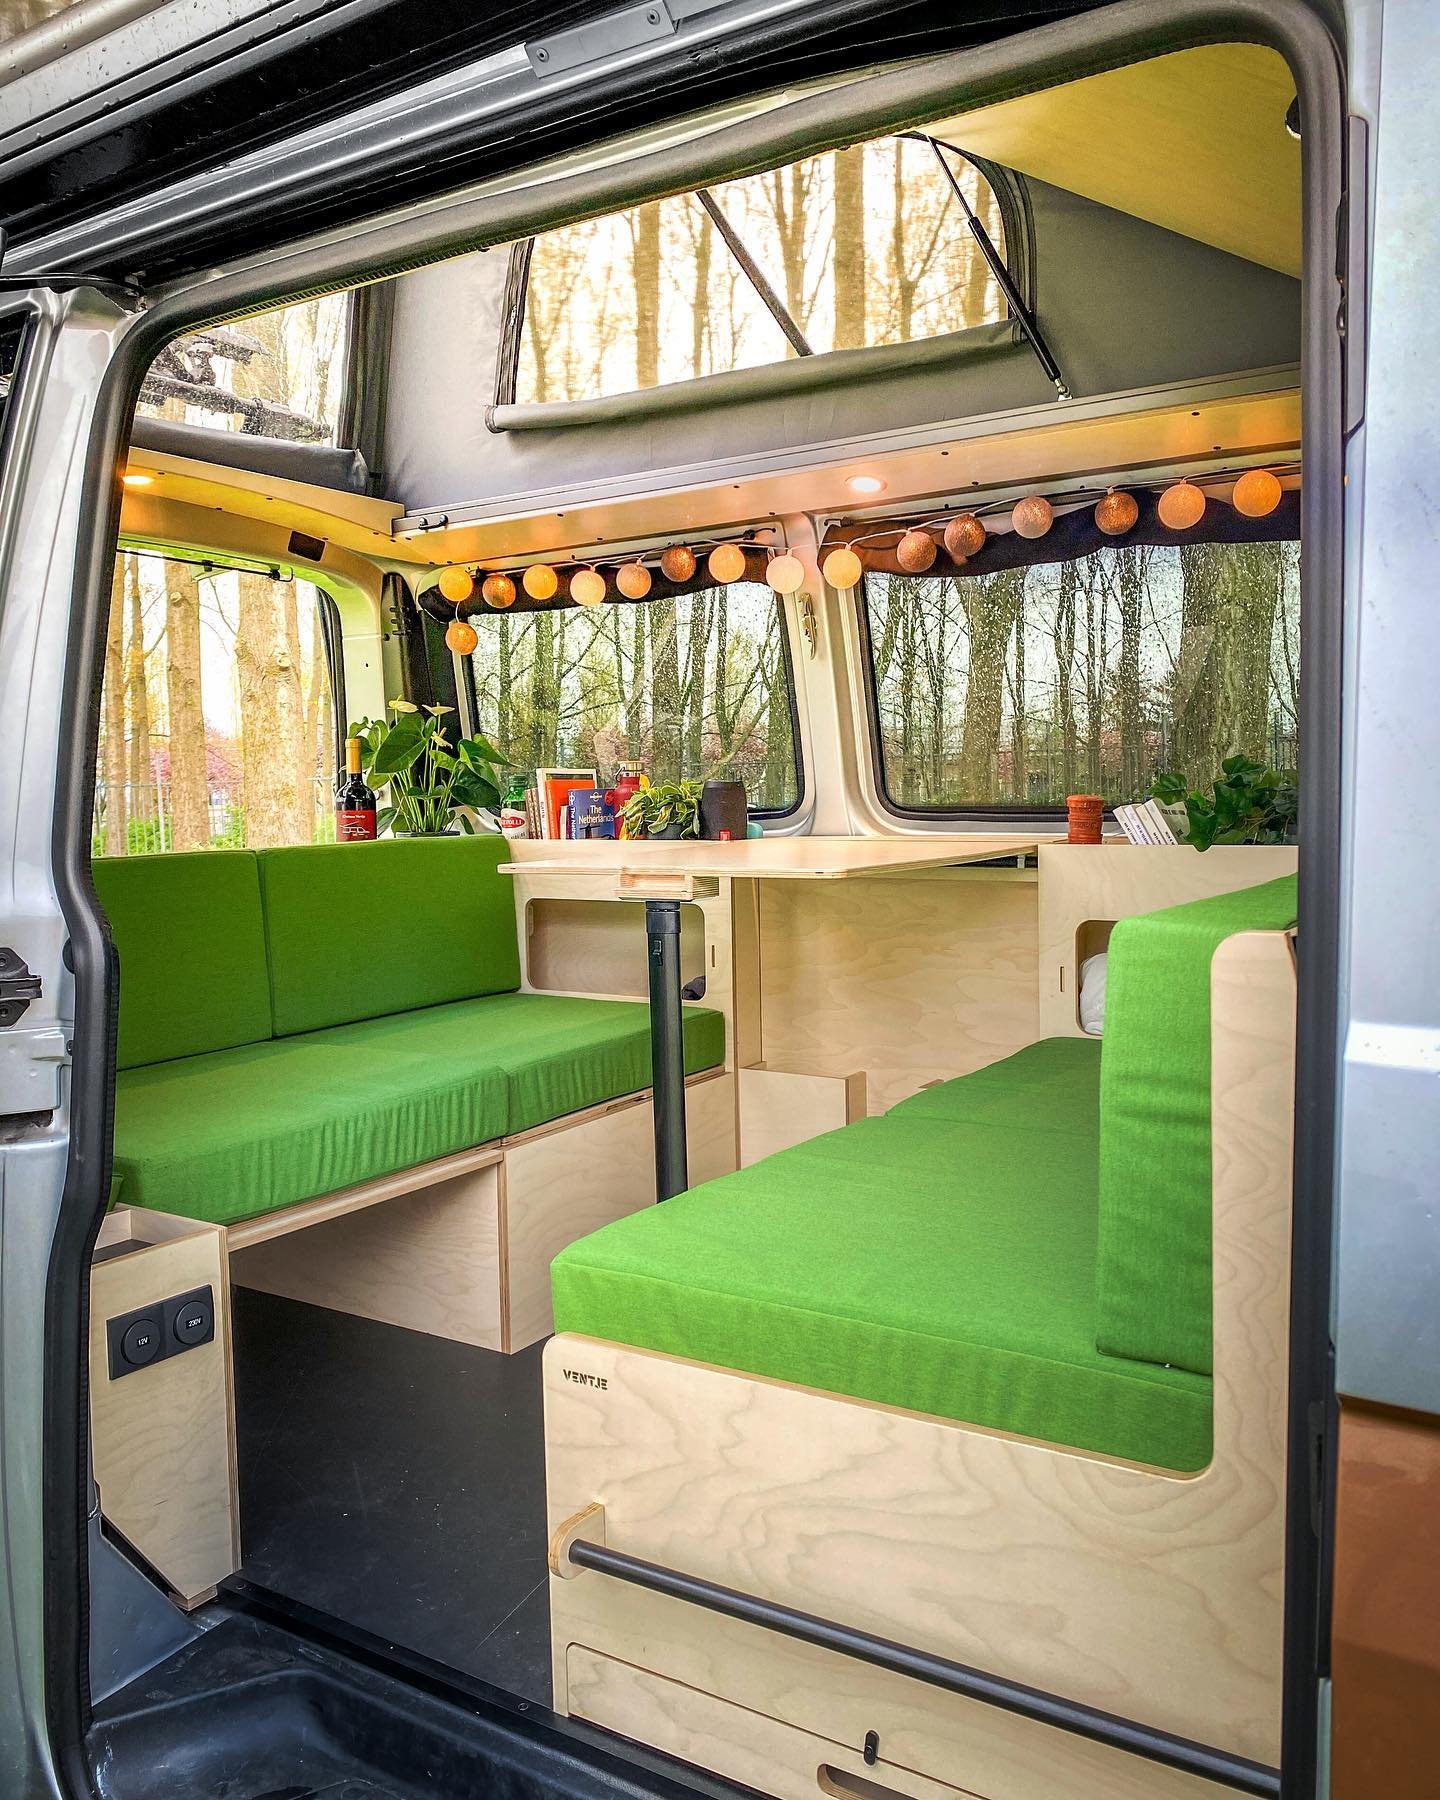 Ventje Campers Are IKEA-Style Gadgets on Wheels, Built for the New ...